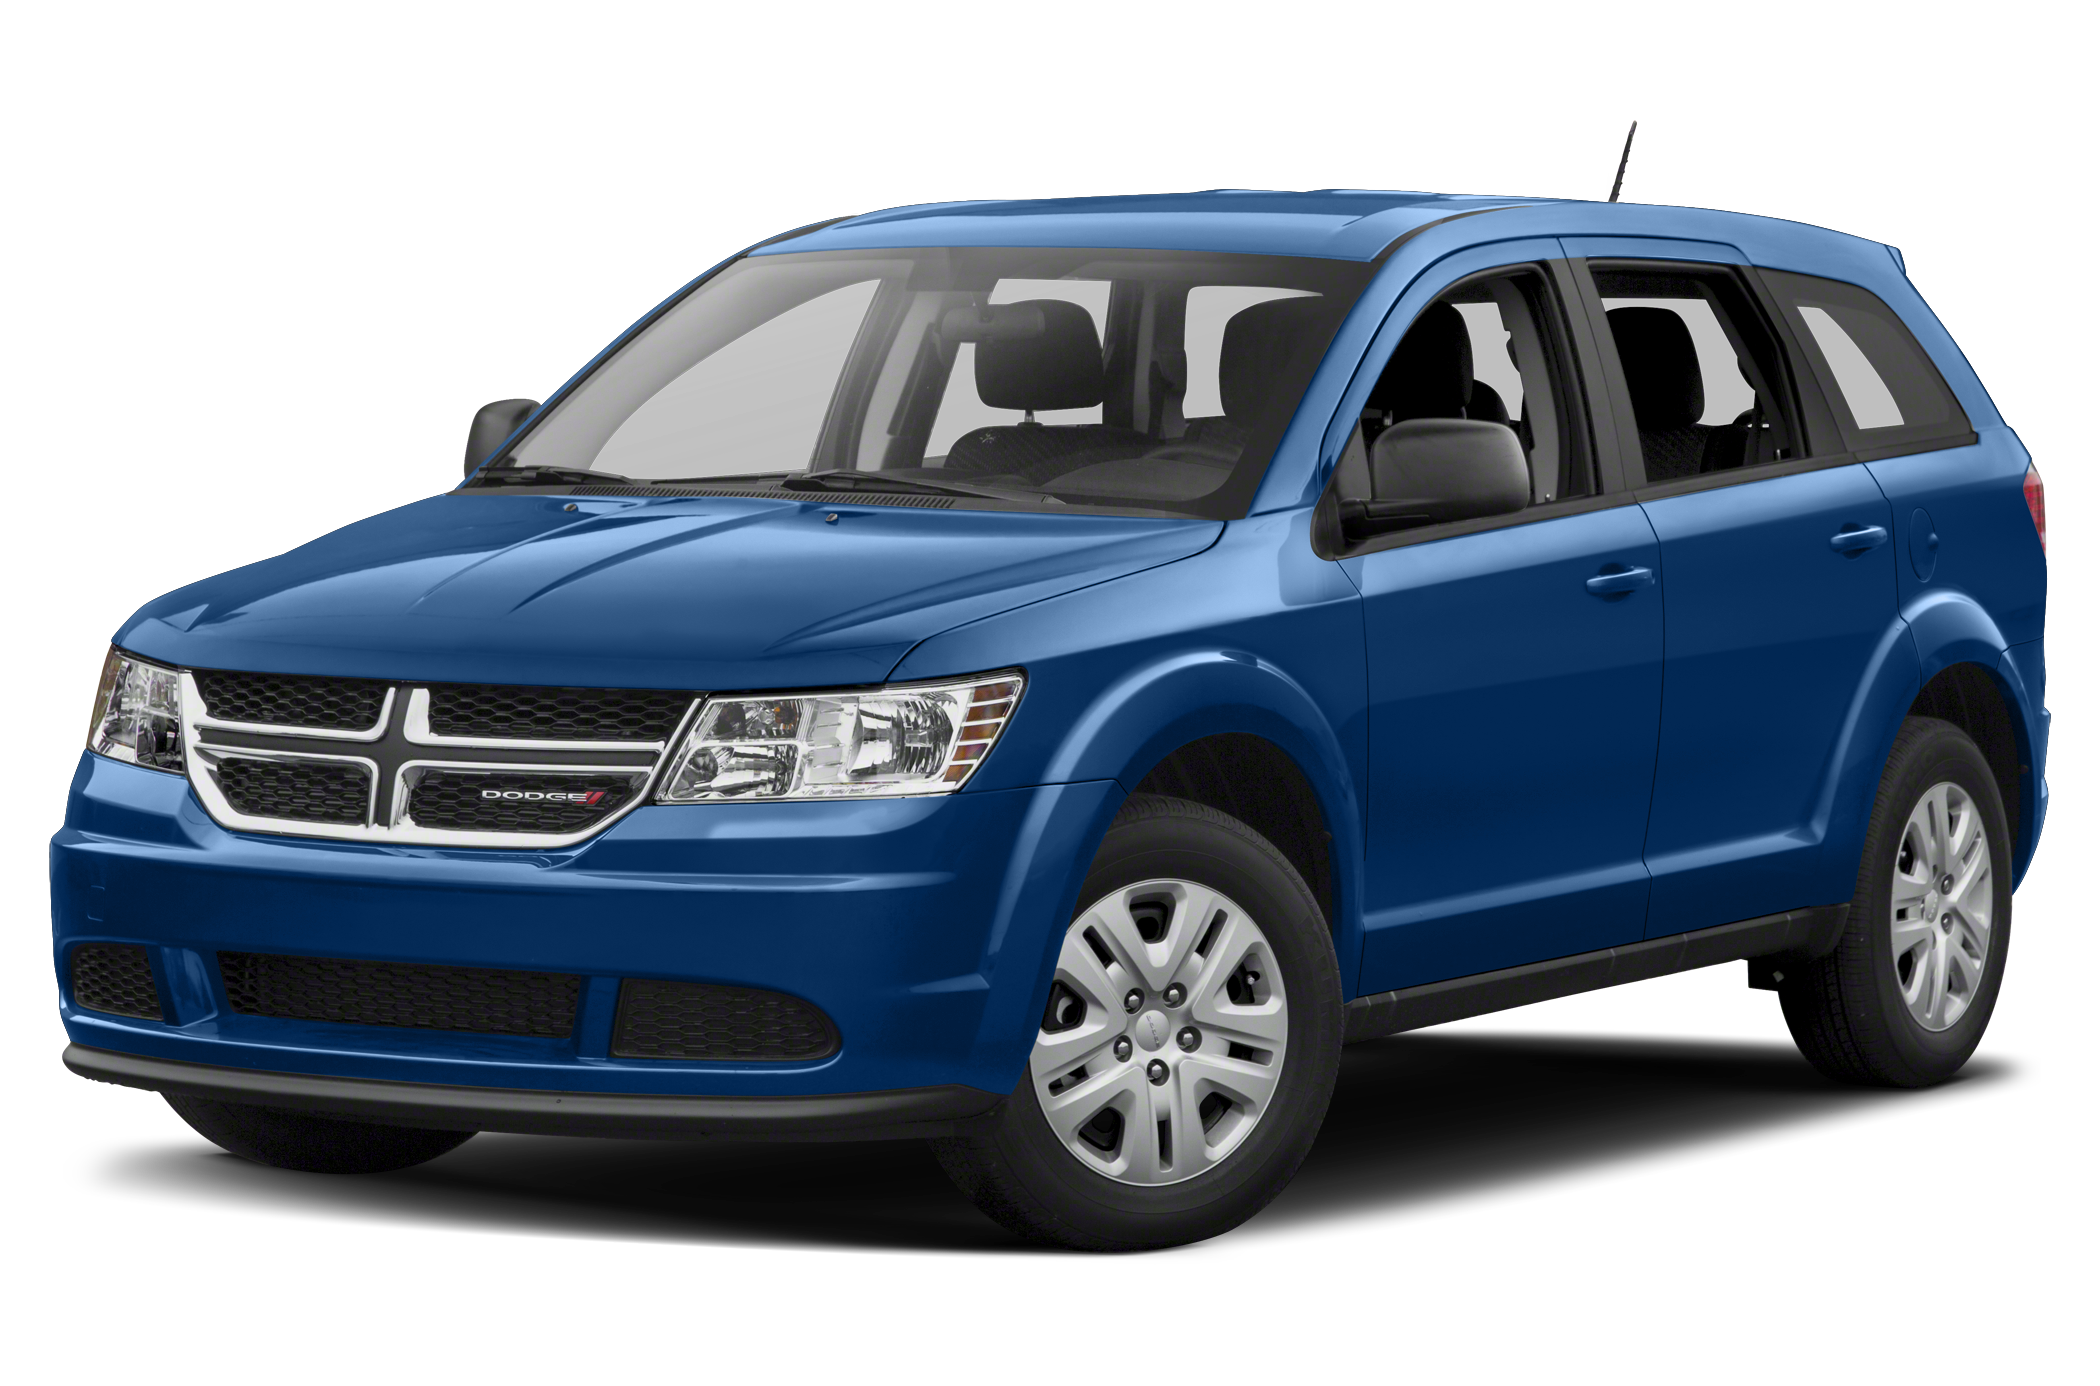 Side view of the 2015 Dodge Journey